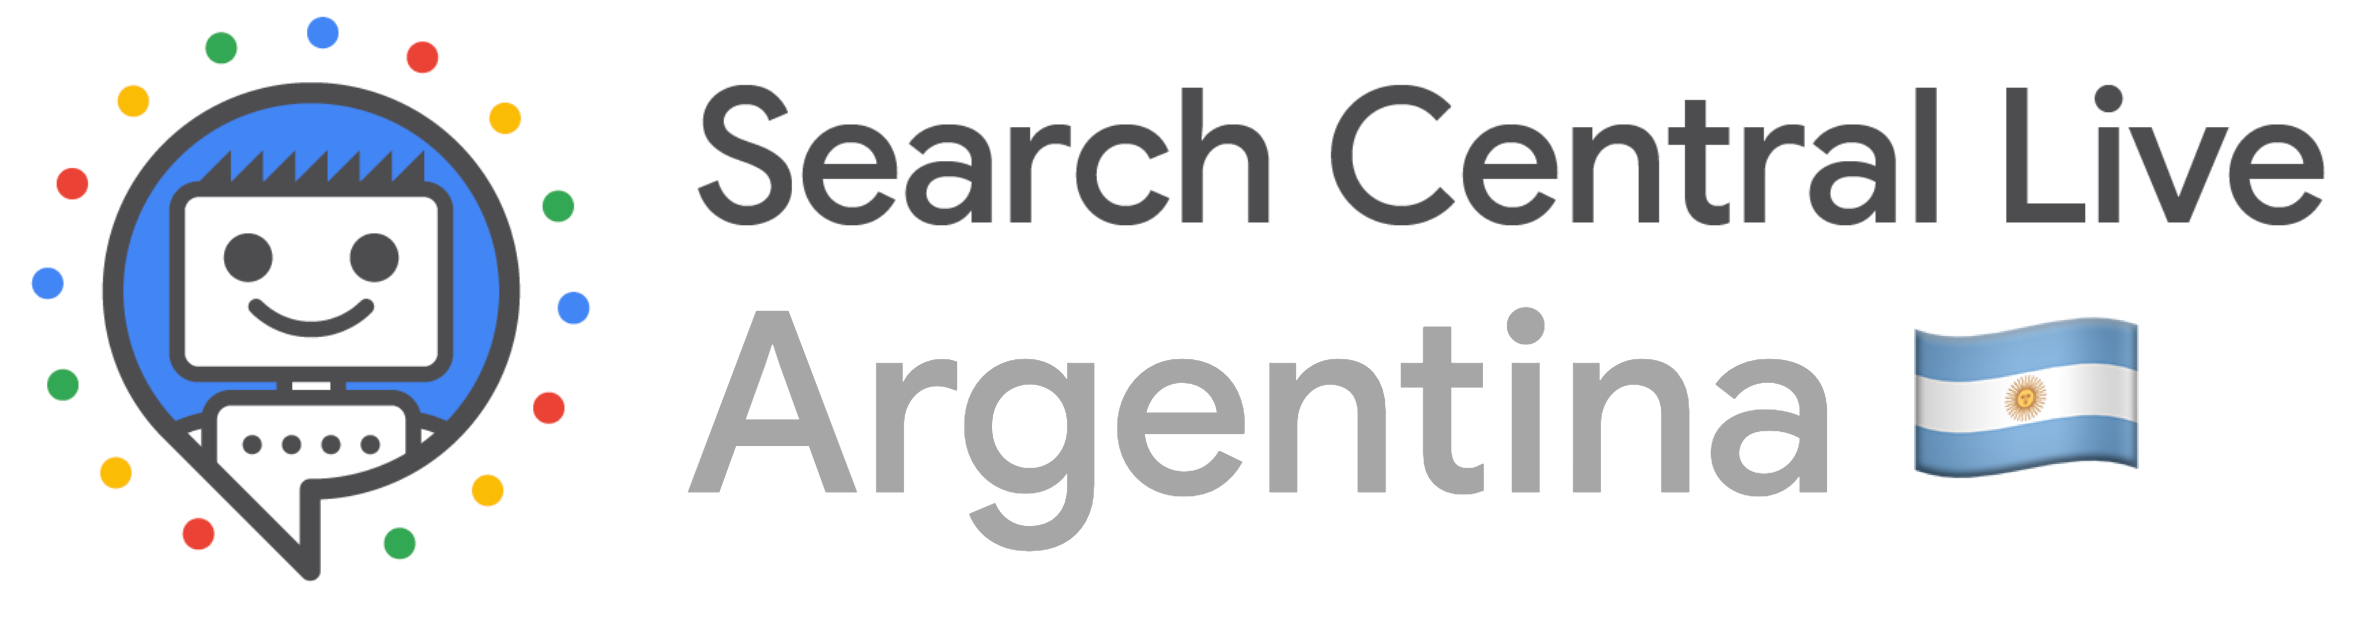 Search Central Live Argentina logo